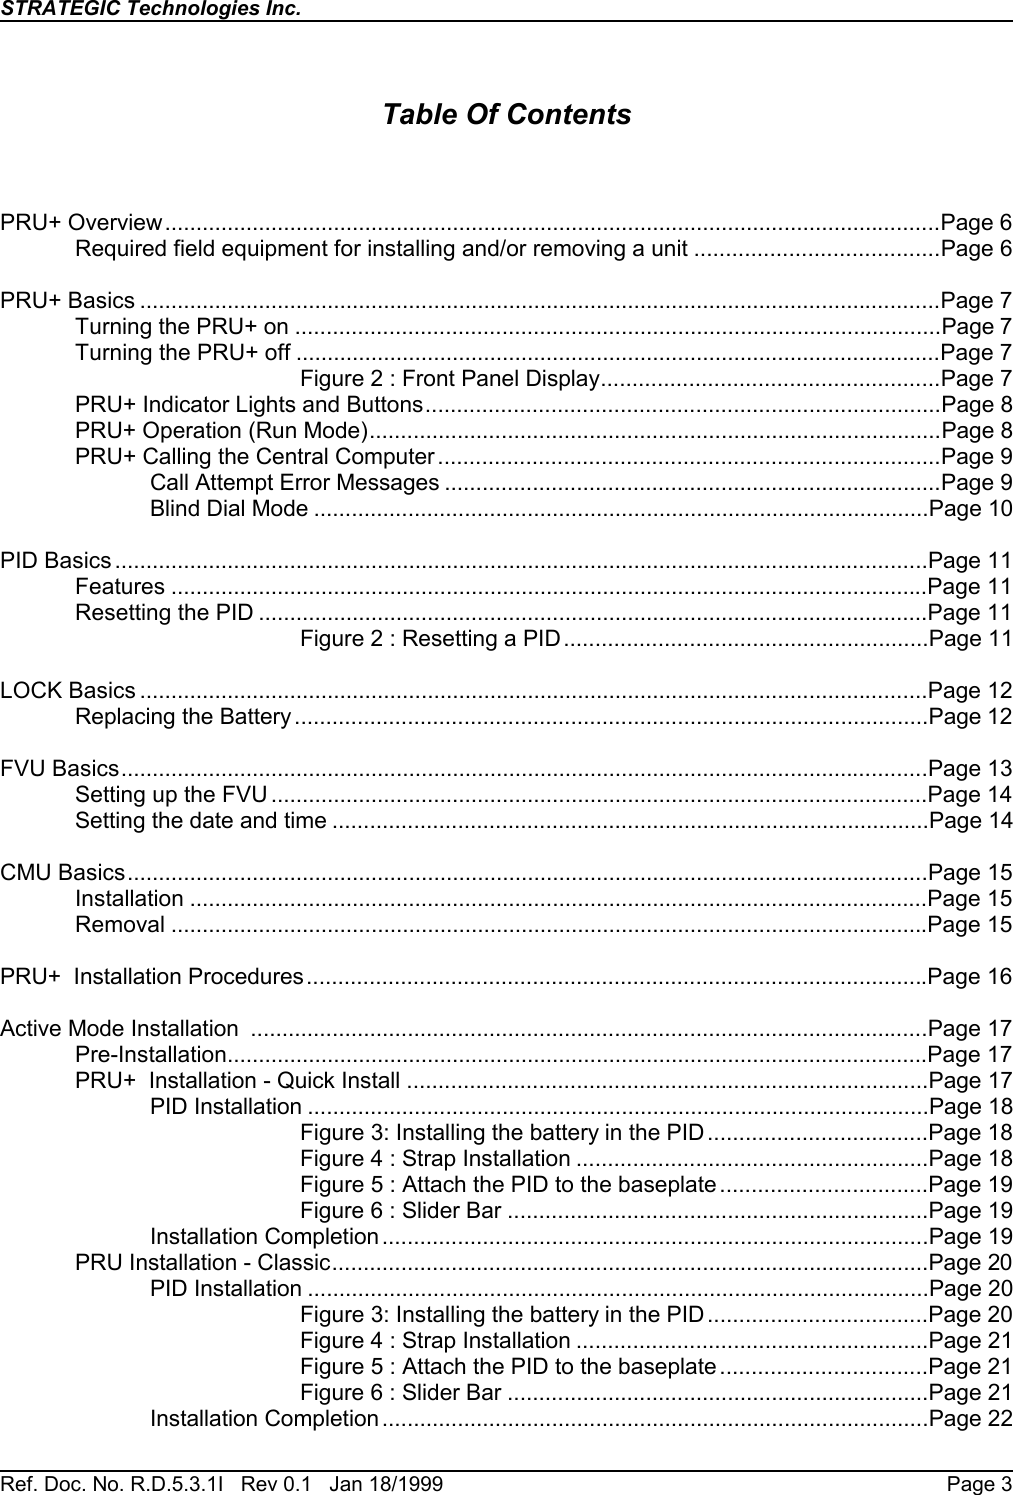 STRATEGIC Technologies Inc.Ref. Doc. No. R.D.5.3.1I   Rev 0.1   Jan 18/1999 Page 3Table Of ContentsPRU+ Overview............................................................................................................................Page 6Required field equipment for installing and/or removing a unit .......................................Page 6PRU+ Basics ................................................................................................................................Page 7Turning the PRU+ on .......................................................................................................Page 7Turning the PRU+ off .......................................................................................................Page 7Figure 2 : Front Panel Display......................................................Page 7PRU+ Indicator Lights and Buttons..................................................................................Page 8PRU+ Operation (Run Mode)...........................................................................................Page 8PRU+ Calling the Central Computer ................................................................................Page 9Call Attempt Error Messages ...............................................................................Page 9Blind Dial Mode ..................................................................................................Page 10PID Basics ..................................................................................................................................Page 11Features .........................................................................................................................Page 11Resetting the PID ...........................................................................................................Page 11Figure 2 : Resetting a PID..........................................................Page 11LOCK Basics ..............................................................................................................................Page 12Replacing the Battery .....................................................................................................Page 12FVU Basics.................................................................................................................................Page 13Setting up the FVU .........................................................................................................Page 14Setting the date and time ...............................................................................................Page 14CMU Basics................................................................................................................................Page 15Installation ......................................................................................................................Page 15Removal .........................................................................................................................Page 15PRU+  Installation Procedures...................................................................................................Page 16Active Mode Installation  ............................................................................................................Page 17Pre-Installation................................................................................................................Page 17PRU+  Installation - Quick Install ...................................................................................Page 17PID Installation ...................................................................................................Page 18Figure 3: Installing the battery in the PID ...................................Page 18Figure 4 : Strap Installation ........................................................Page 18Figure 5 : Attach the PID to the baseplate.................................Page 19Figure 6 : Slider Bar ...................................................................Page 19Installation Completion.......................................................................................Page 19PRU Installation - Classic...............................................................................................Page 20PID Installation ...................................................................................................Page 20Figure 3: Installing the battery in the PID ...................................Page 20Figure 4 : Strap Installation ........................................................Page 21Figure 5 : Attach the PID to the baseplate.................................Page 21Figure 6 : Slider Bar ...................................................................Page 21Installation Completion.......................................................................................Page 22